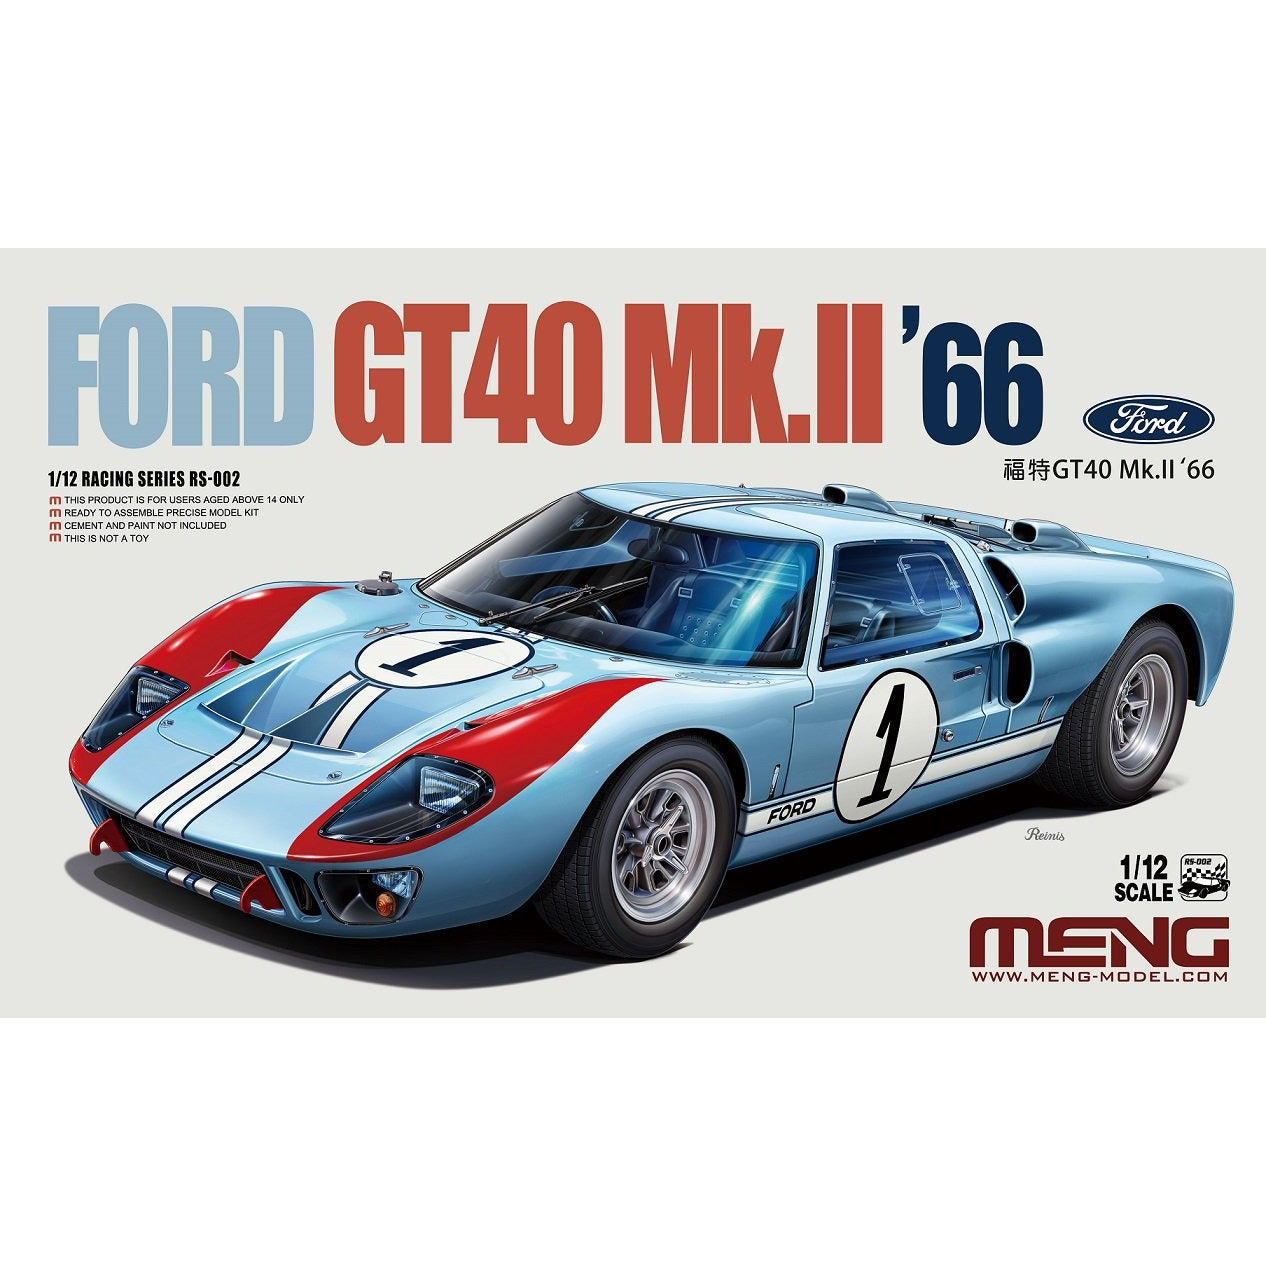 1966 Ford GT40 Mk.II 1/12 Model Car Kit #RS-002 by Meng